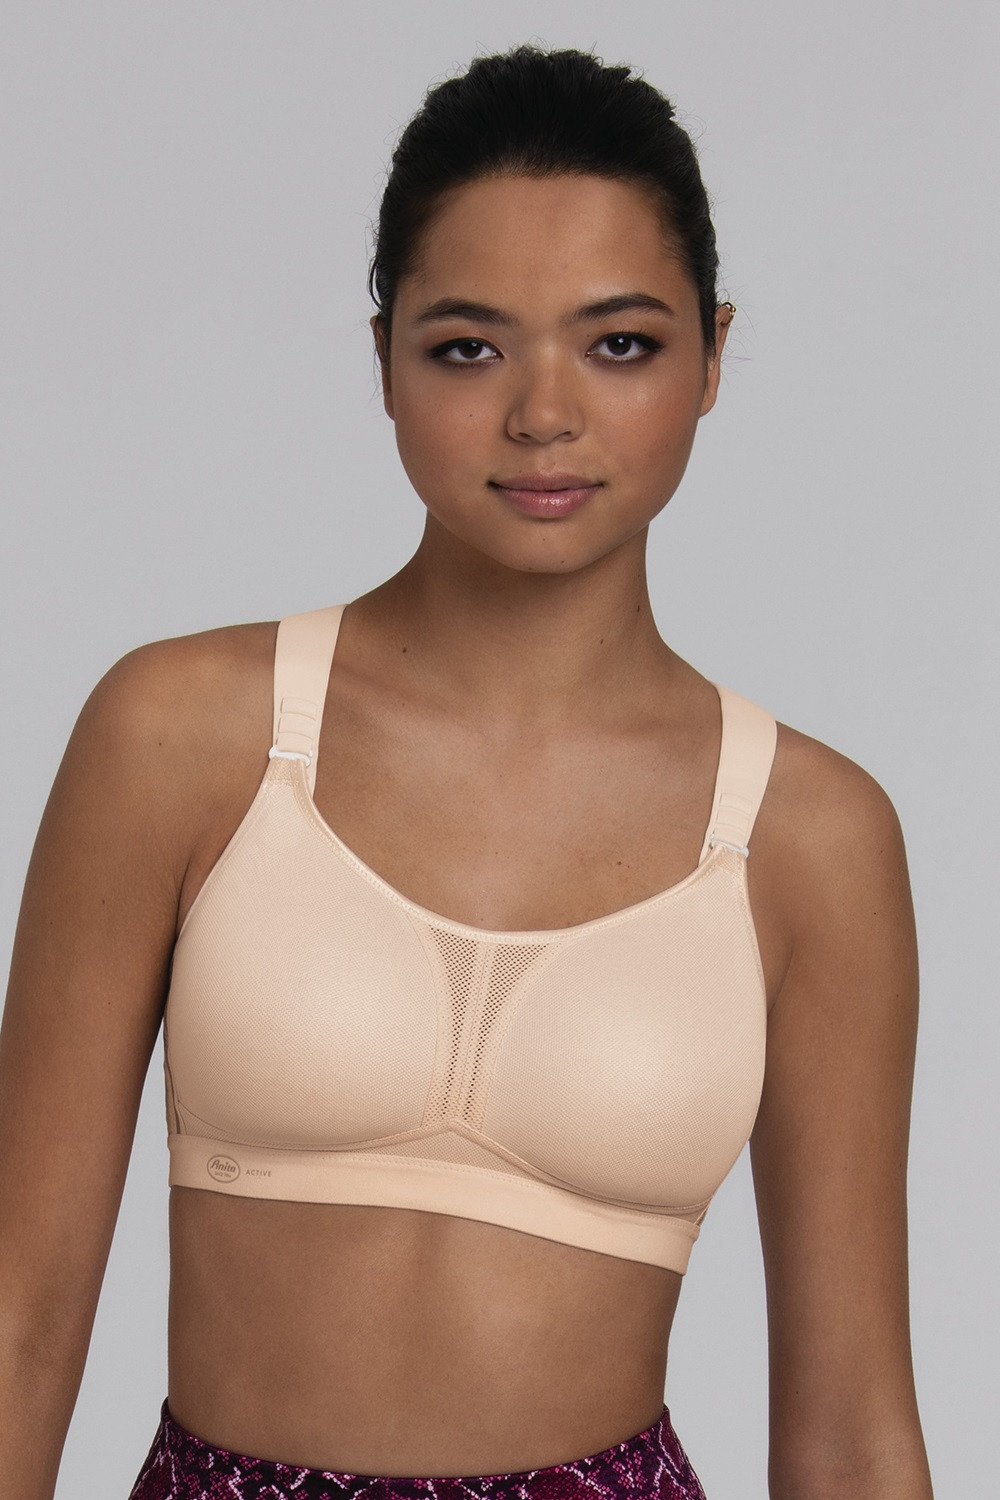 https://aldipa.gr/eshop/11697-superlarge_default/functional-maximum-support-non-wired-sports-bra-with-cross-straps-on-the-back-5537.jpg